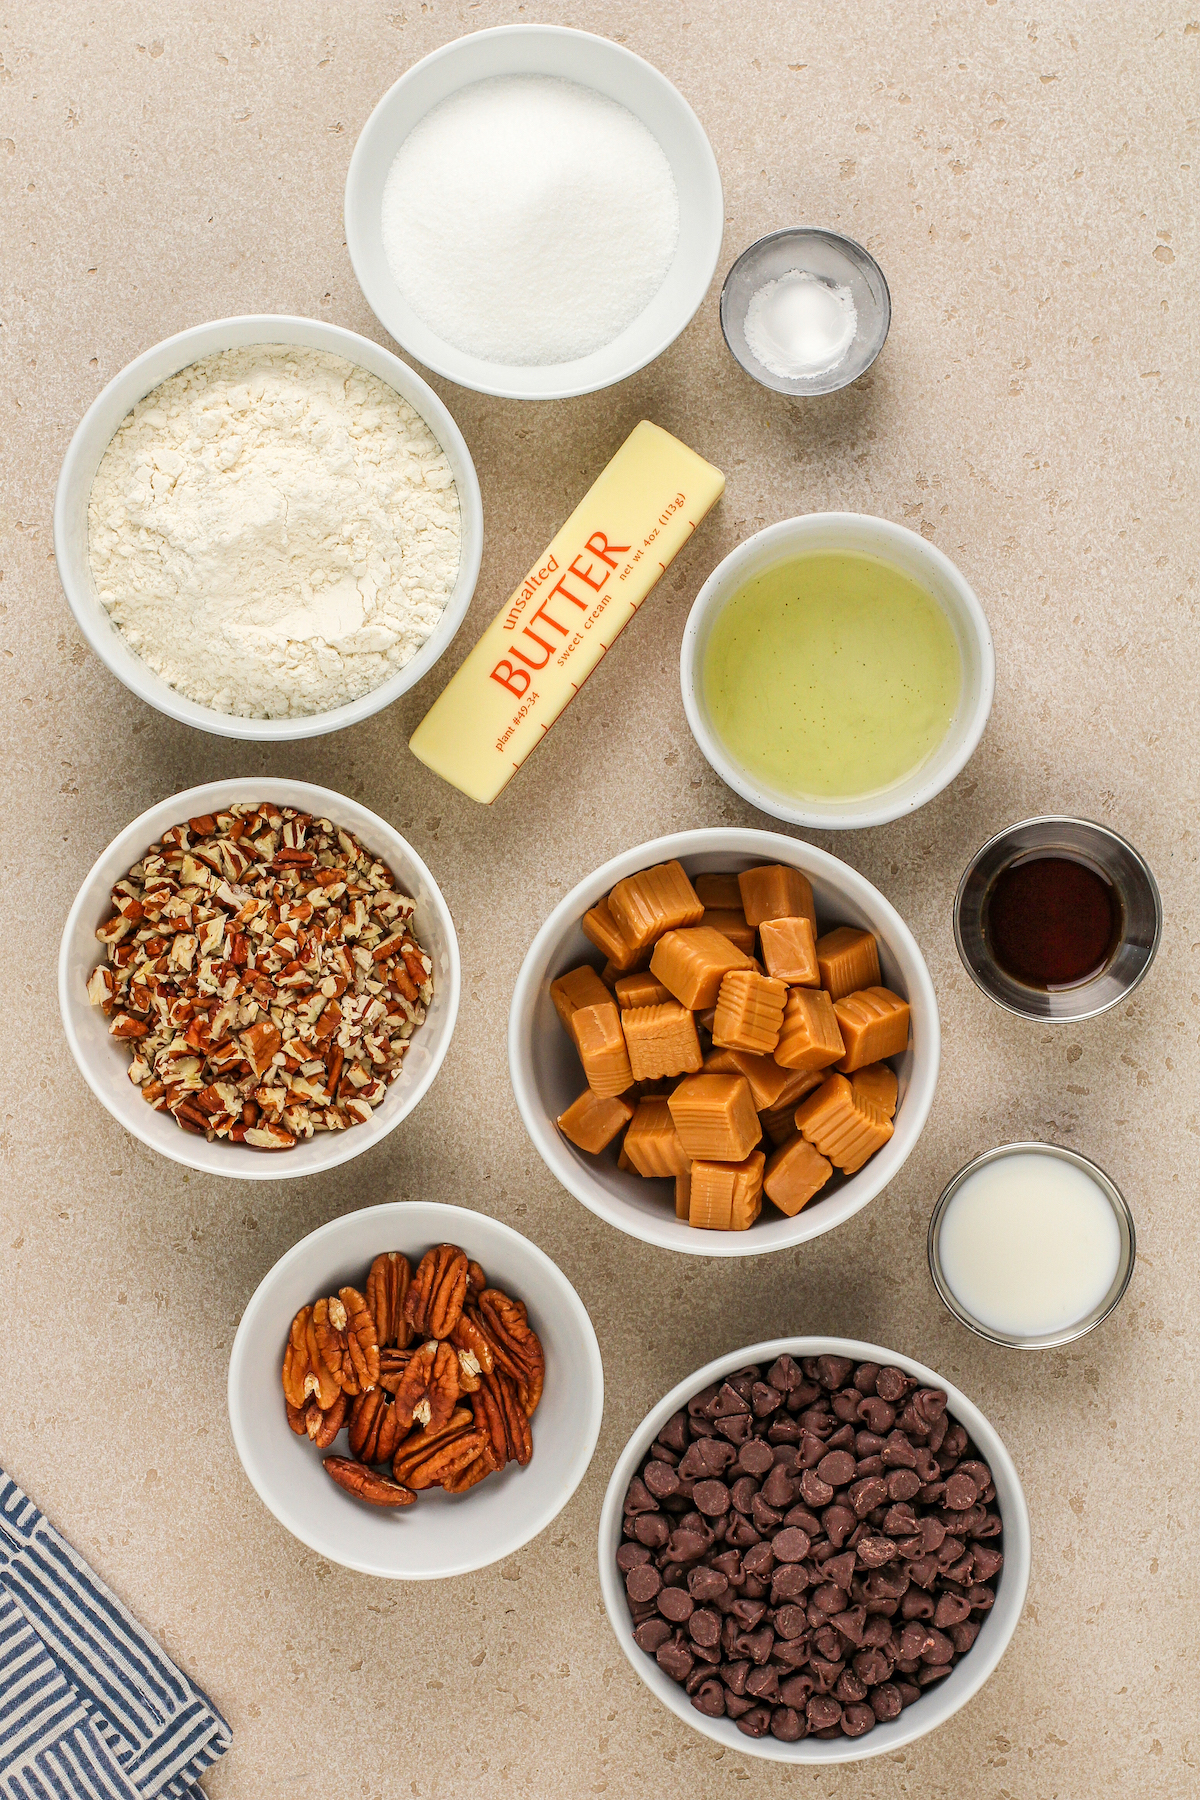 Ingredients to make turtle cookies are laid out in small bowls.